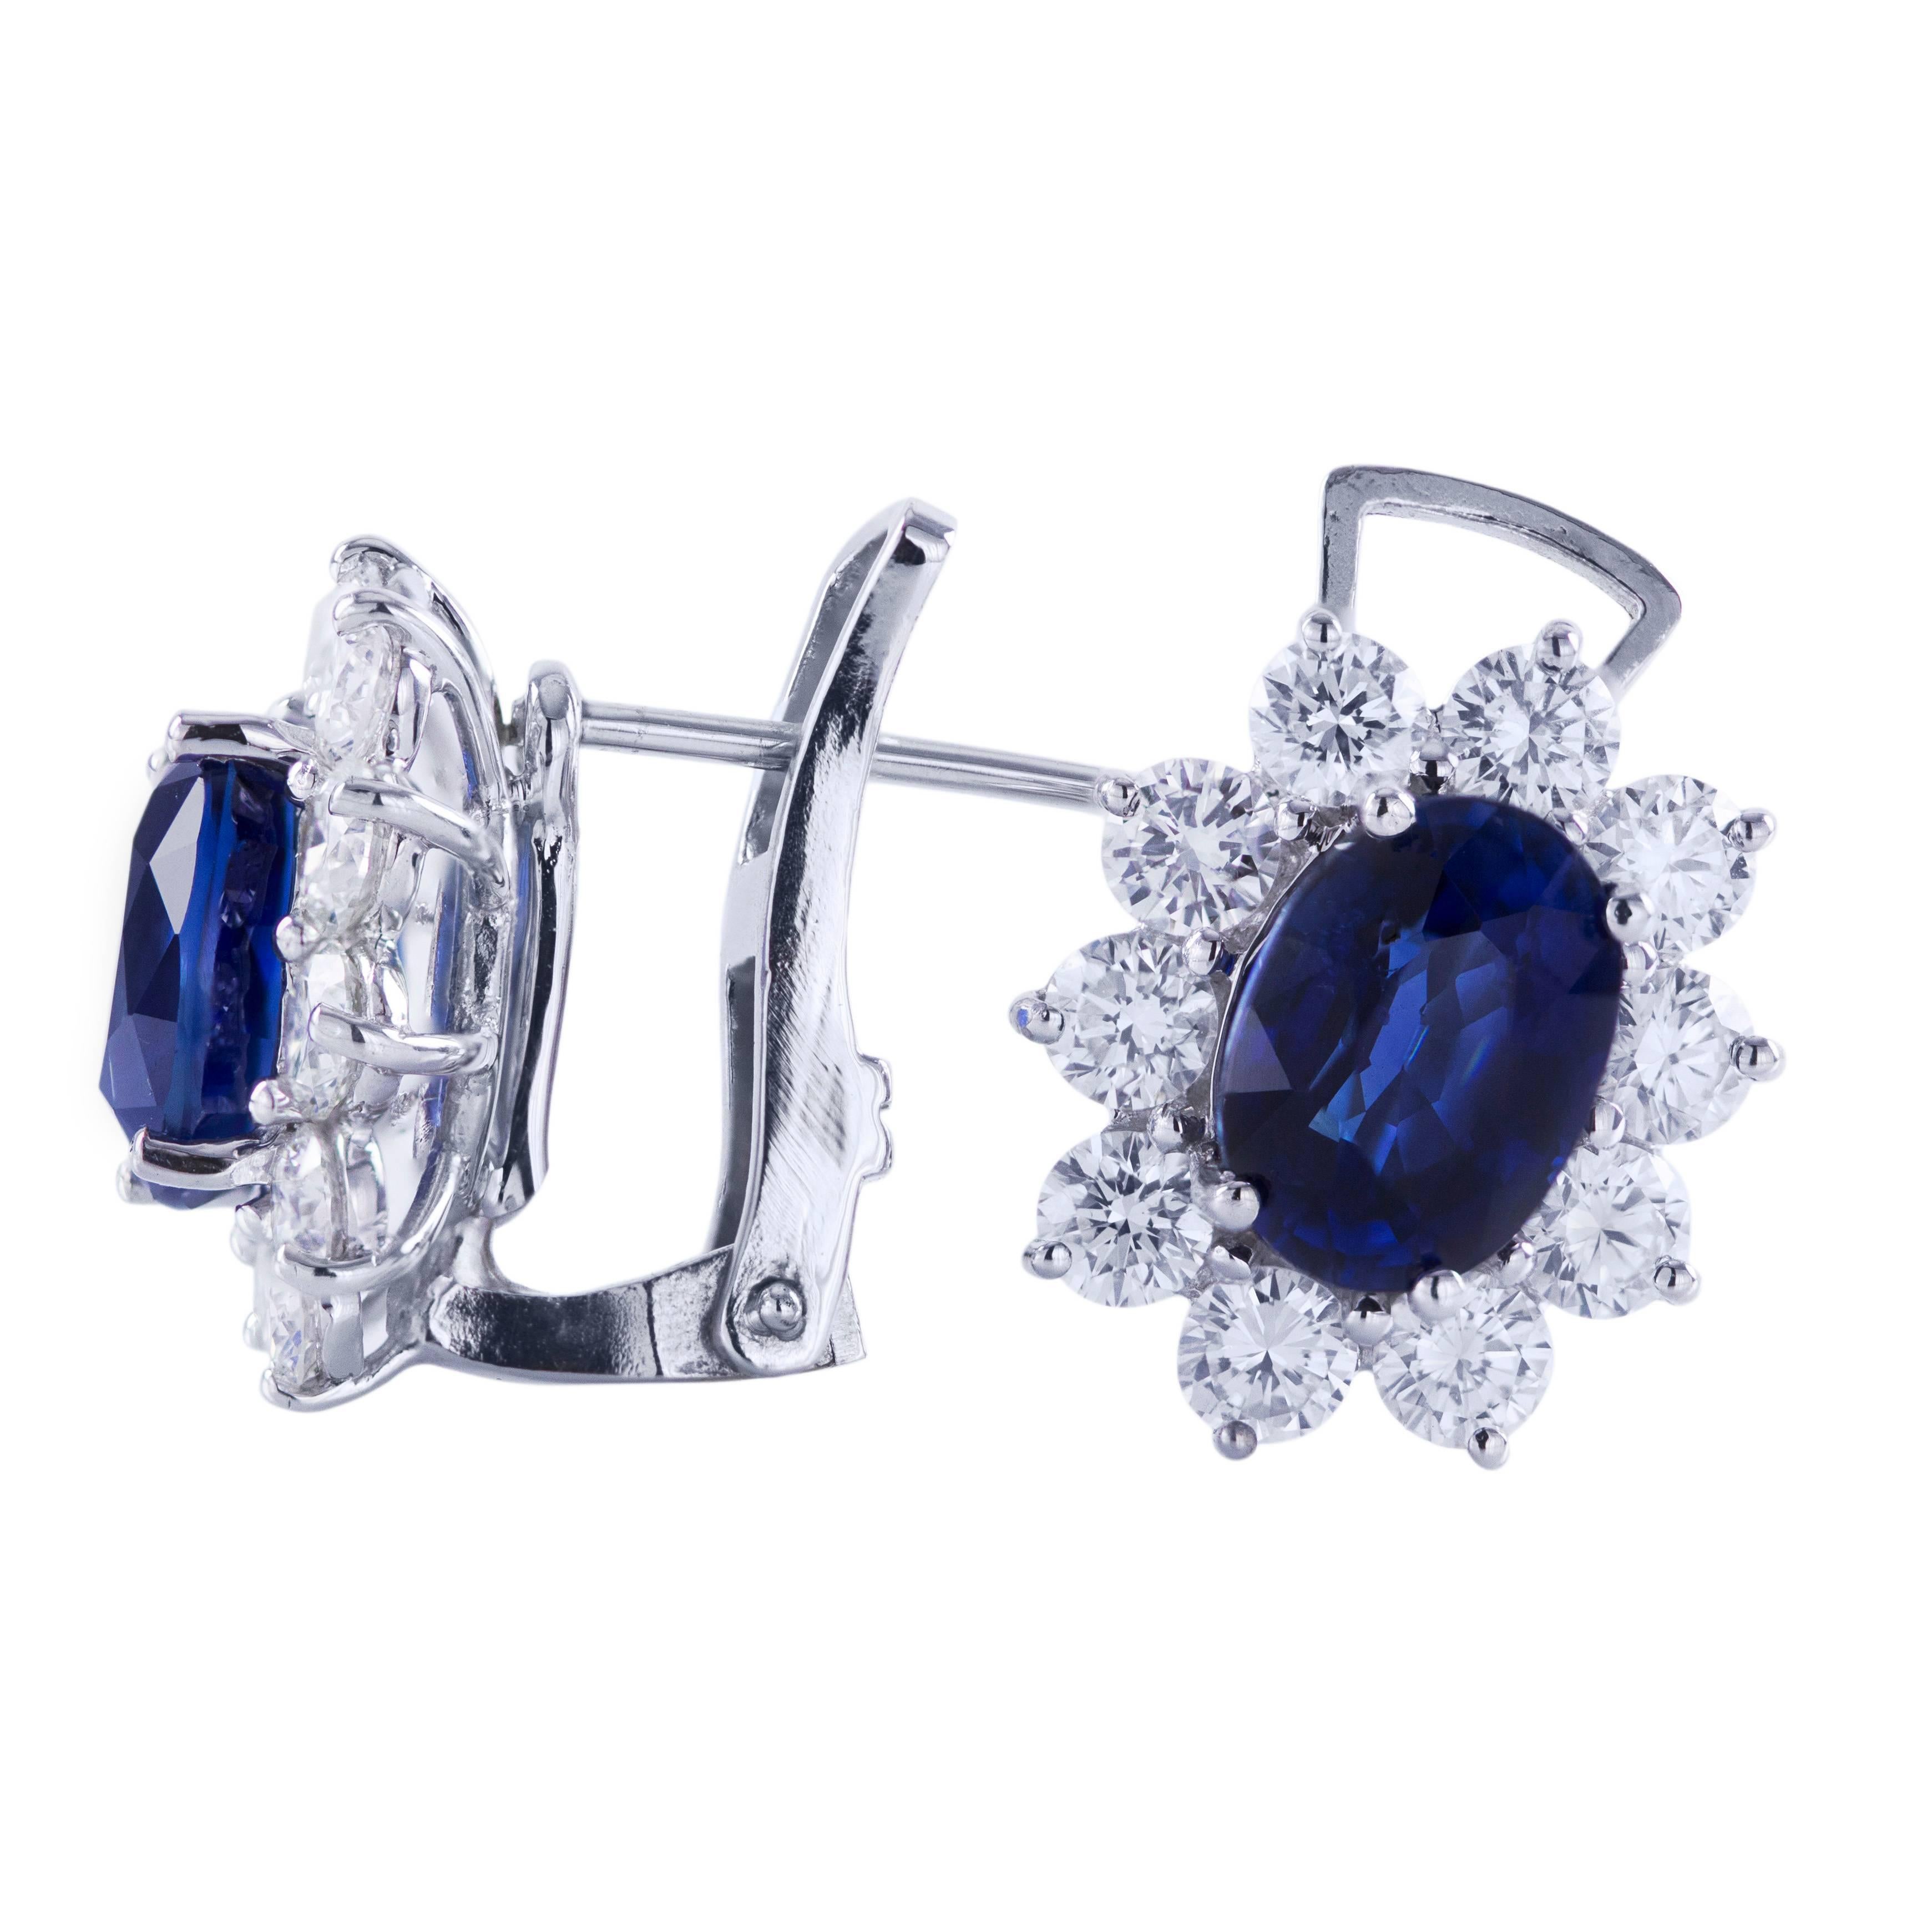 These beautiful cluster earrings feature 2 natural blue sapphire center stones. The weight of the sapphires is 3.96 carats total. Each sapphire is surrounded by a single row of round brilliant diamonds weighing 1.75 carats total. Latch back. Made in